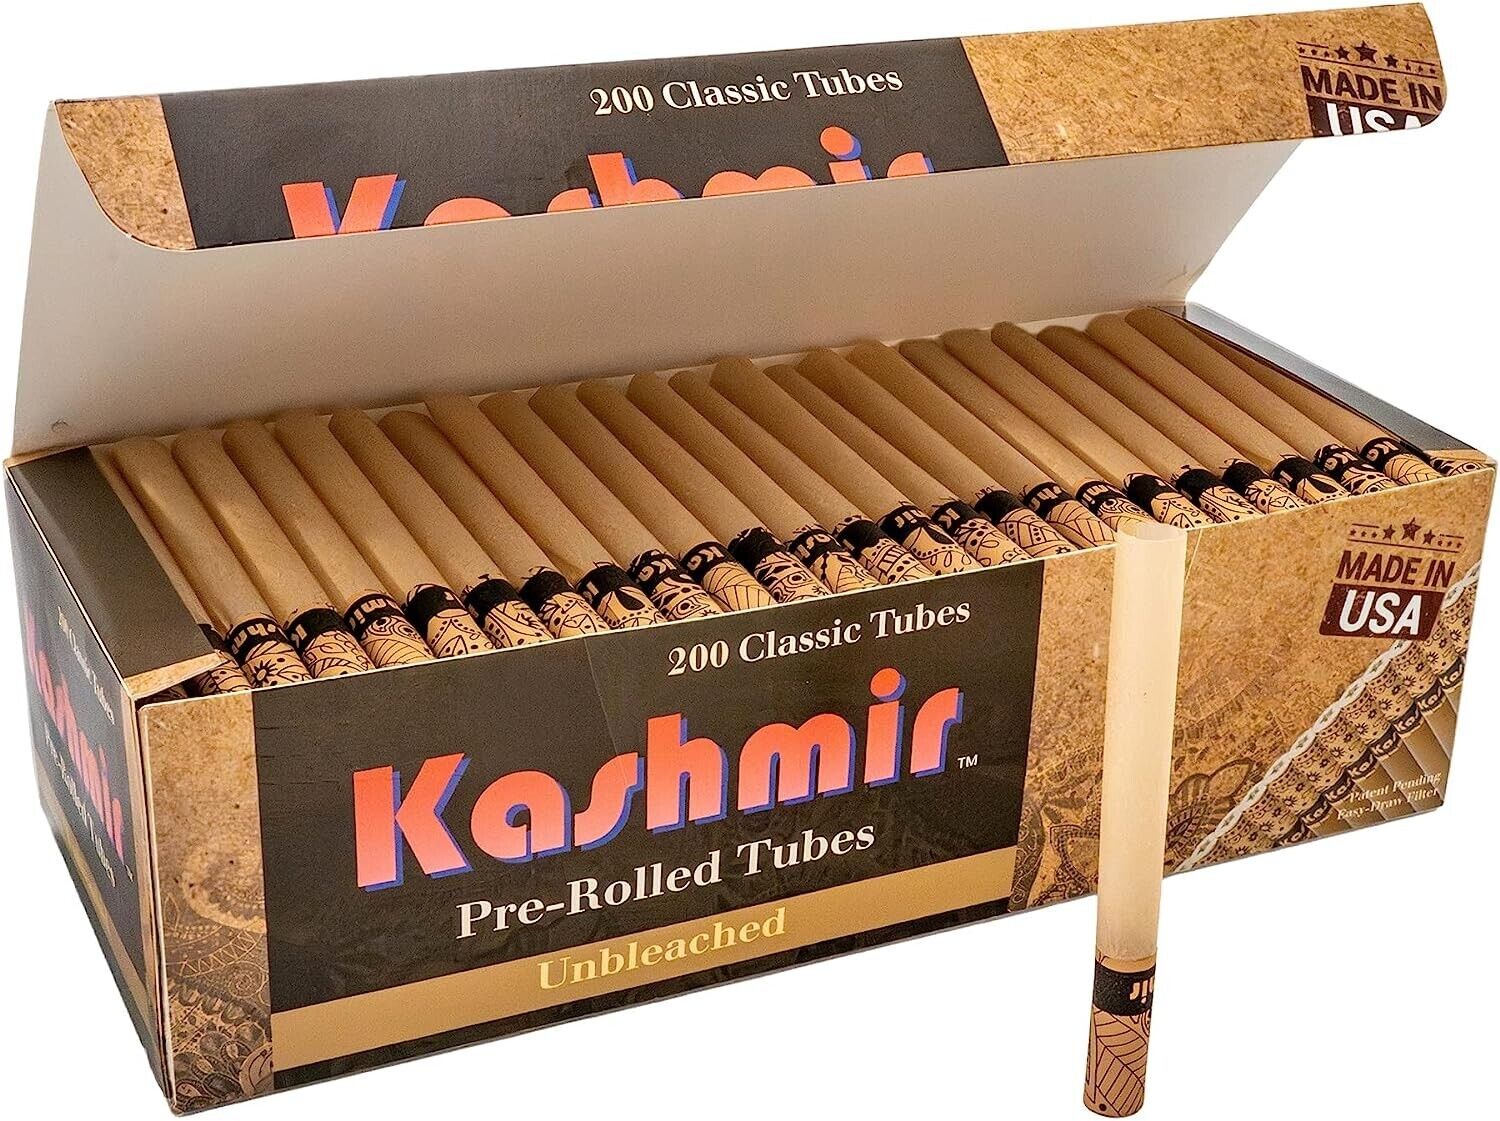 Kashmir: Pre-Rolled Unbleached Classic Cigarette Tubes Made in USA 200 Pack